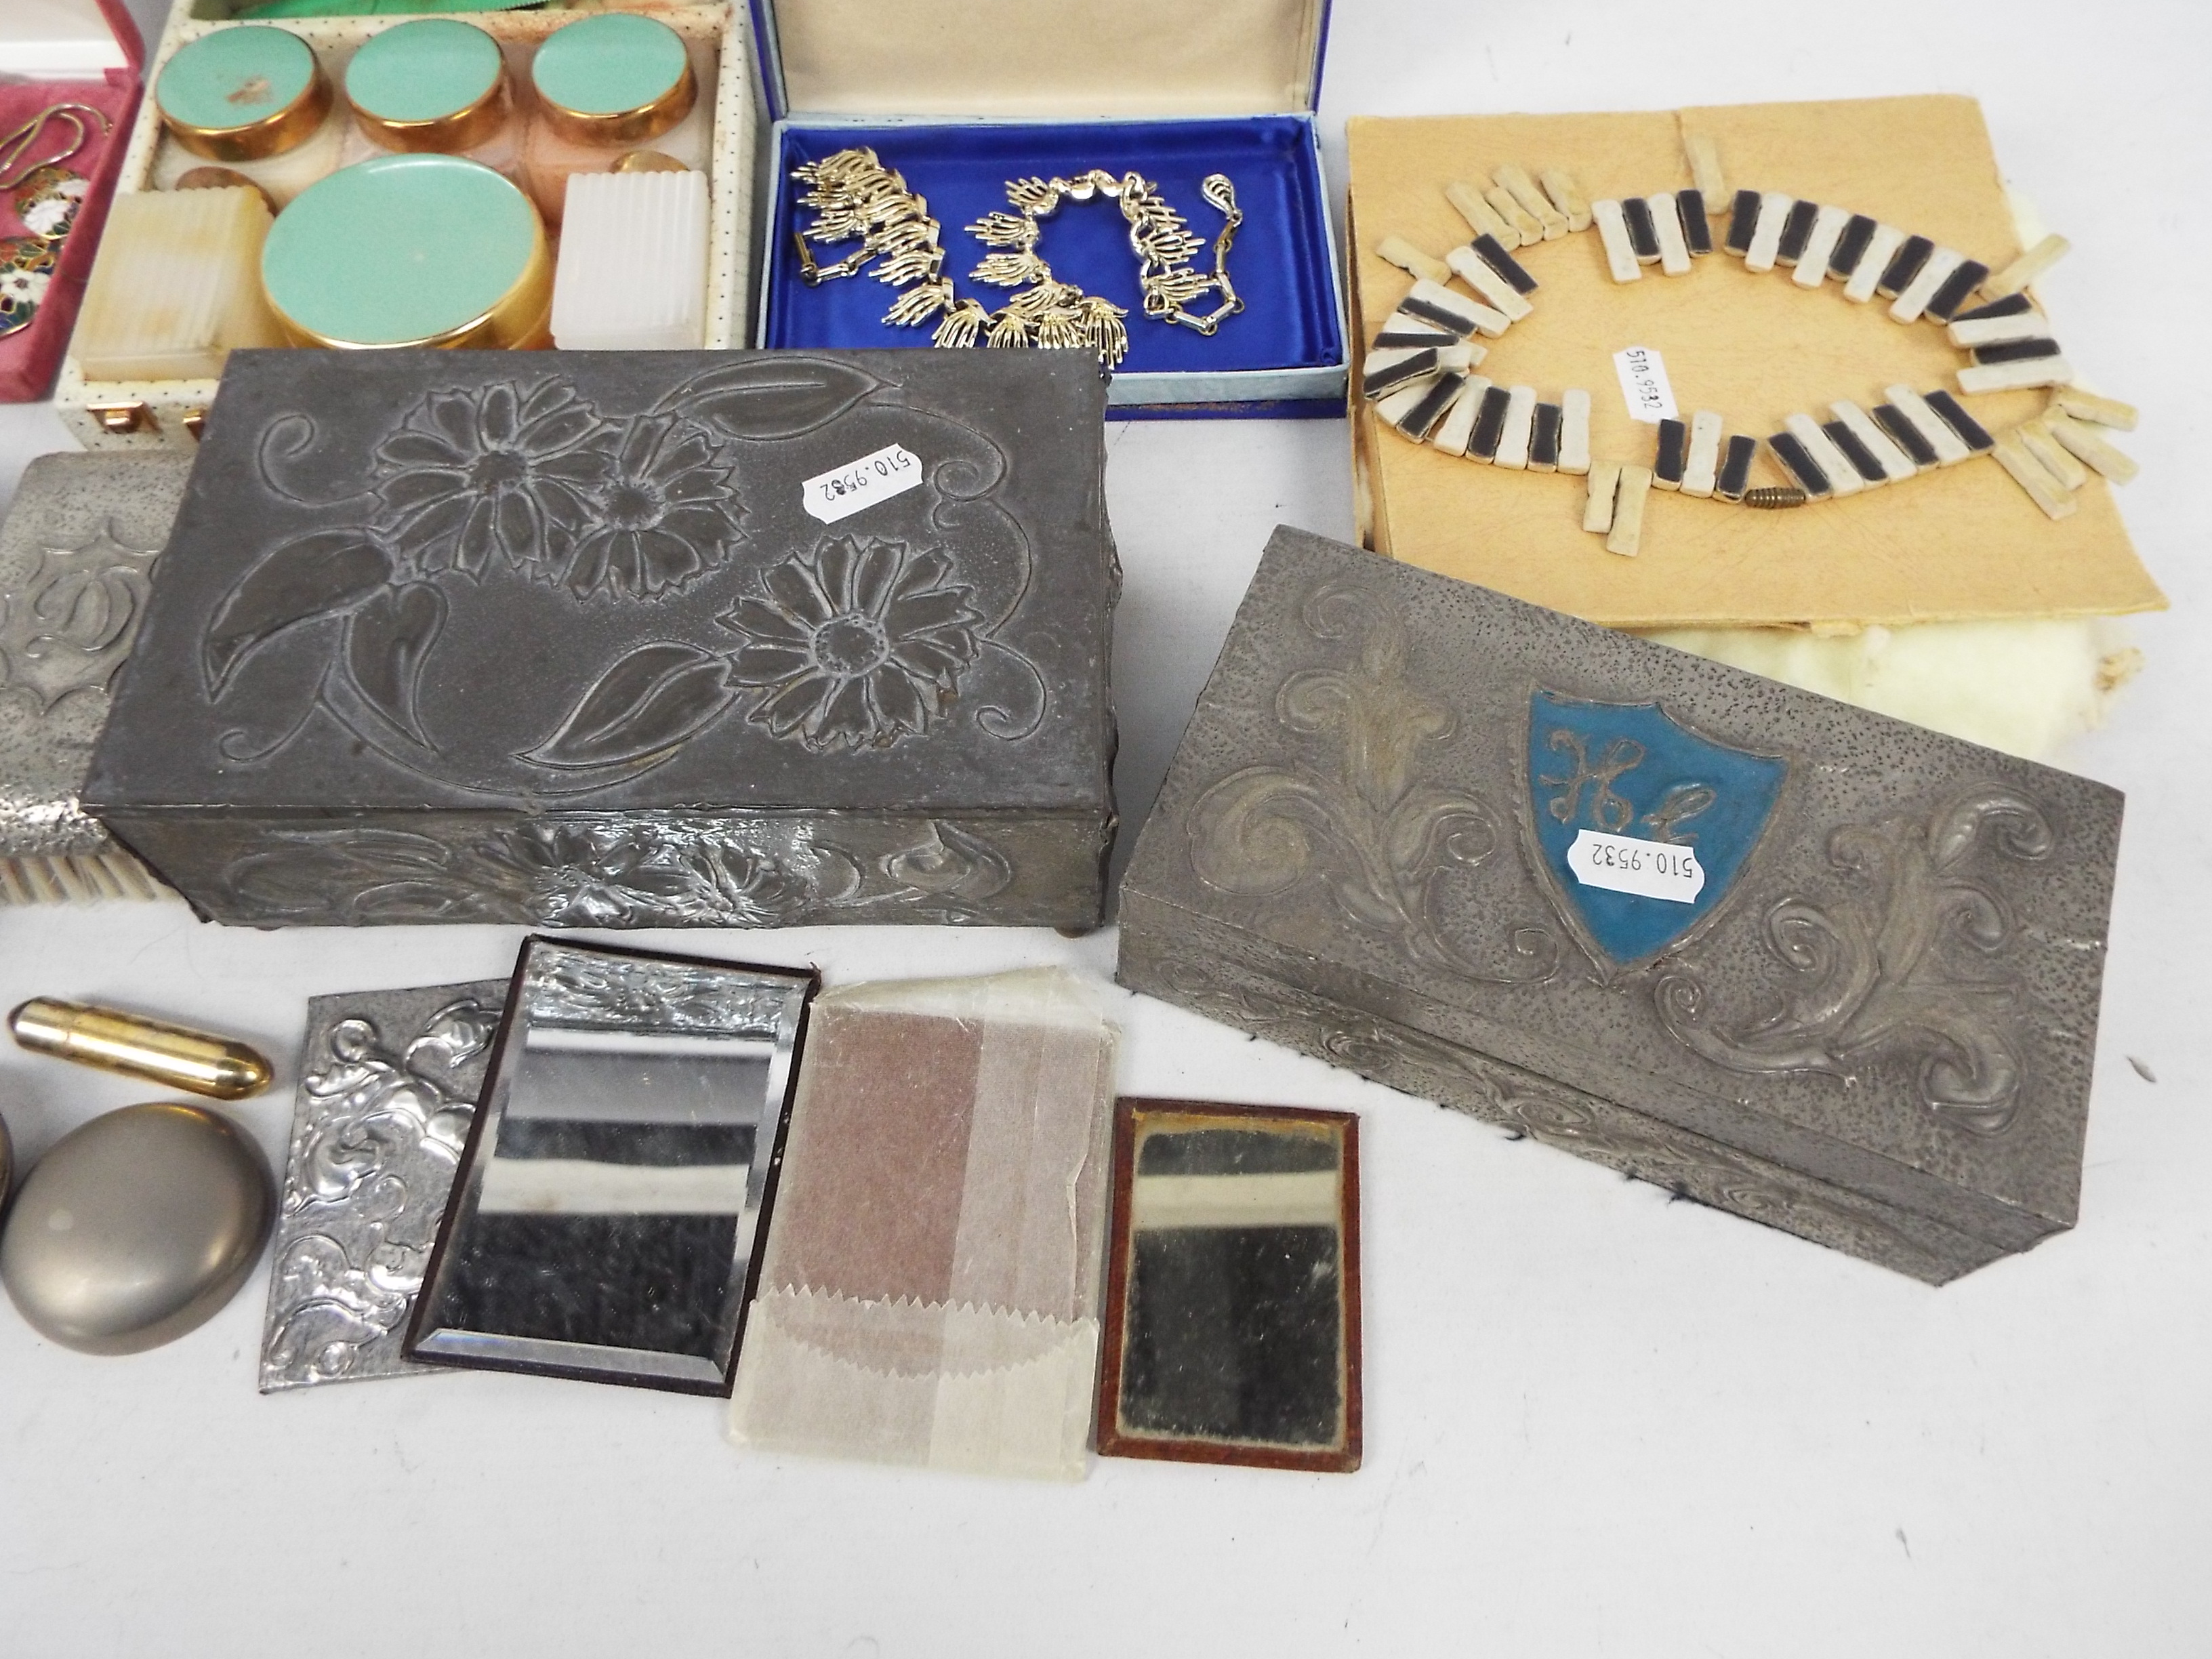 Lot to include jewellery / trinket boxes, costume jewellery, grooming / manicure sets and other. - Image 4 of 5